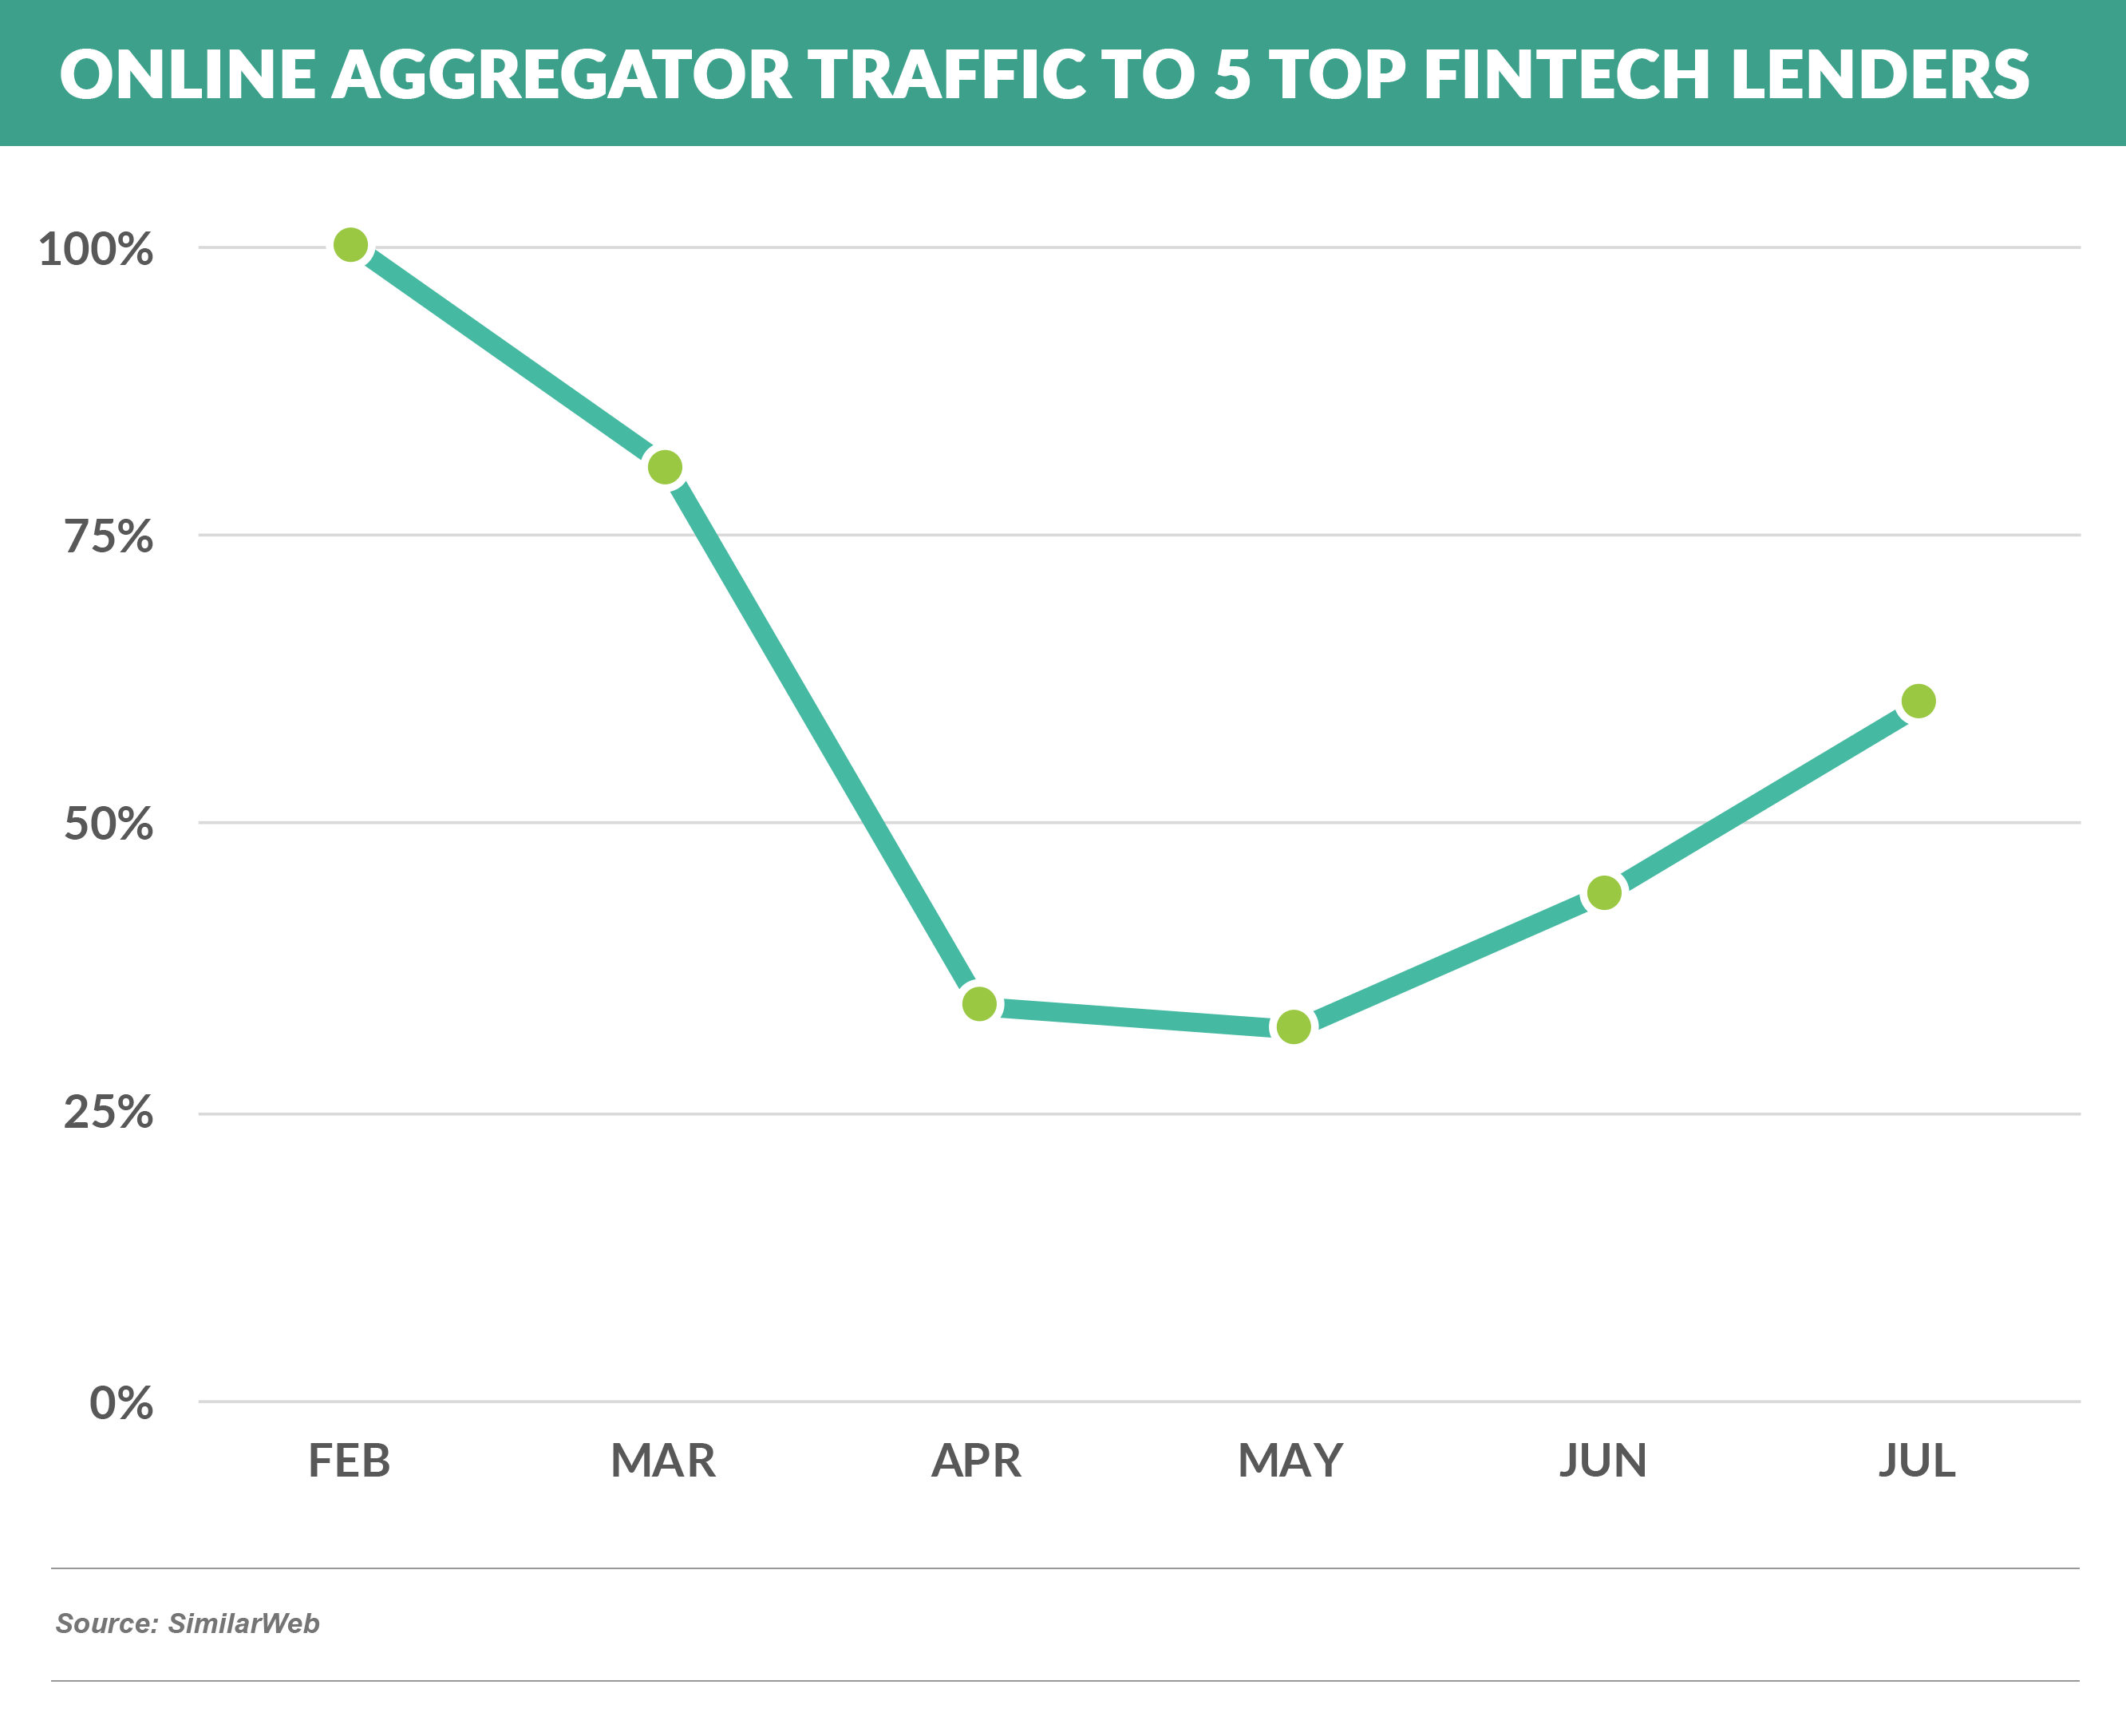 PERSONAL LOAN Traffic from TOP Online Aggregators (1)